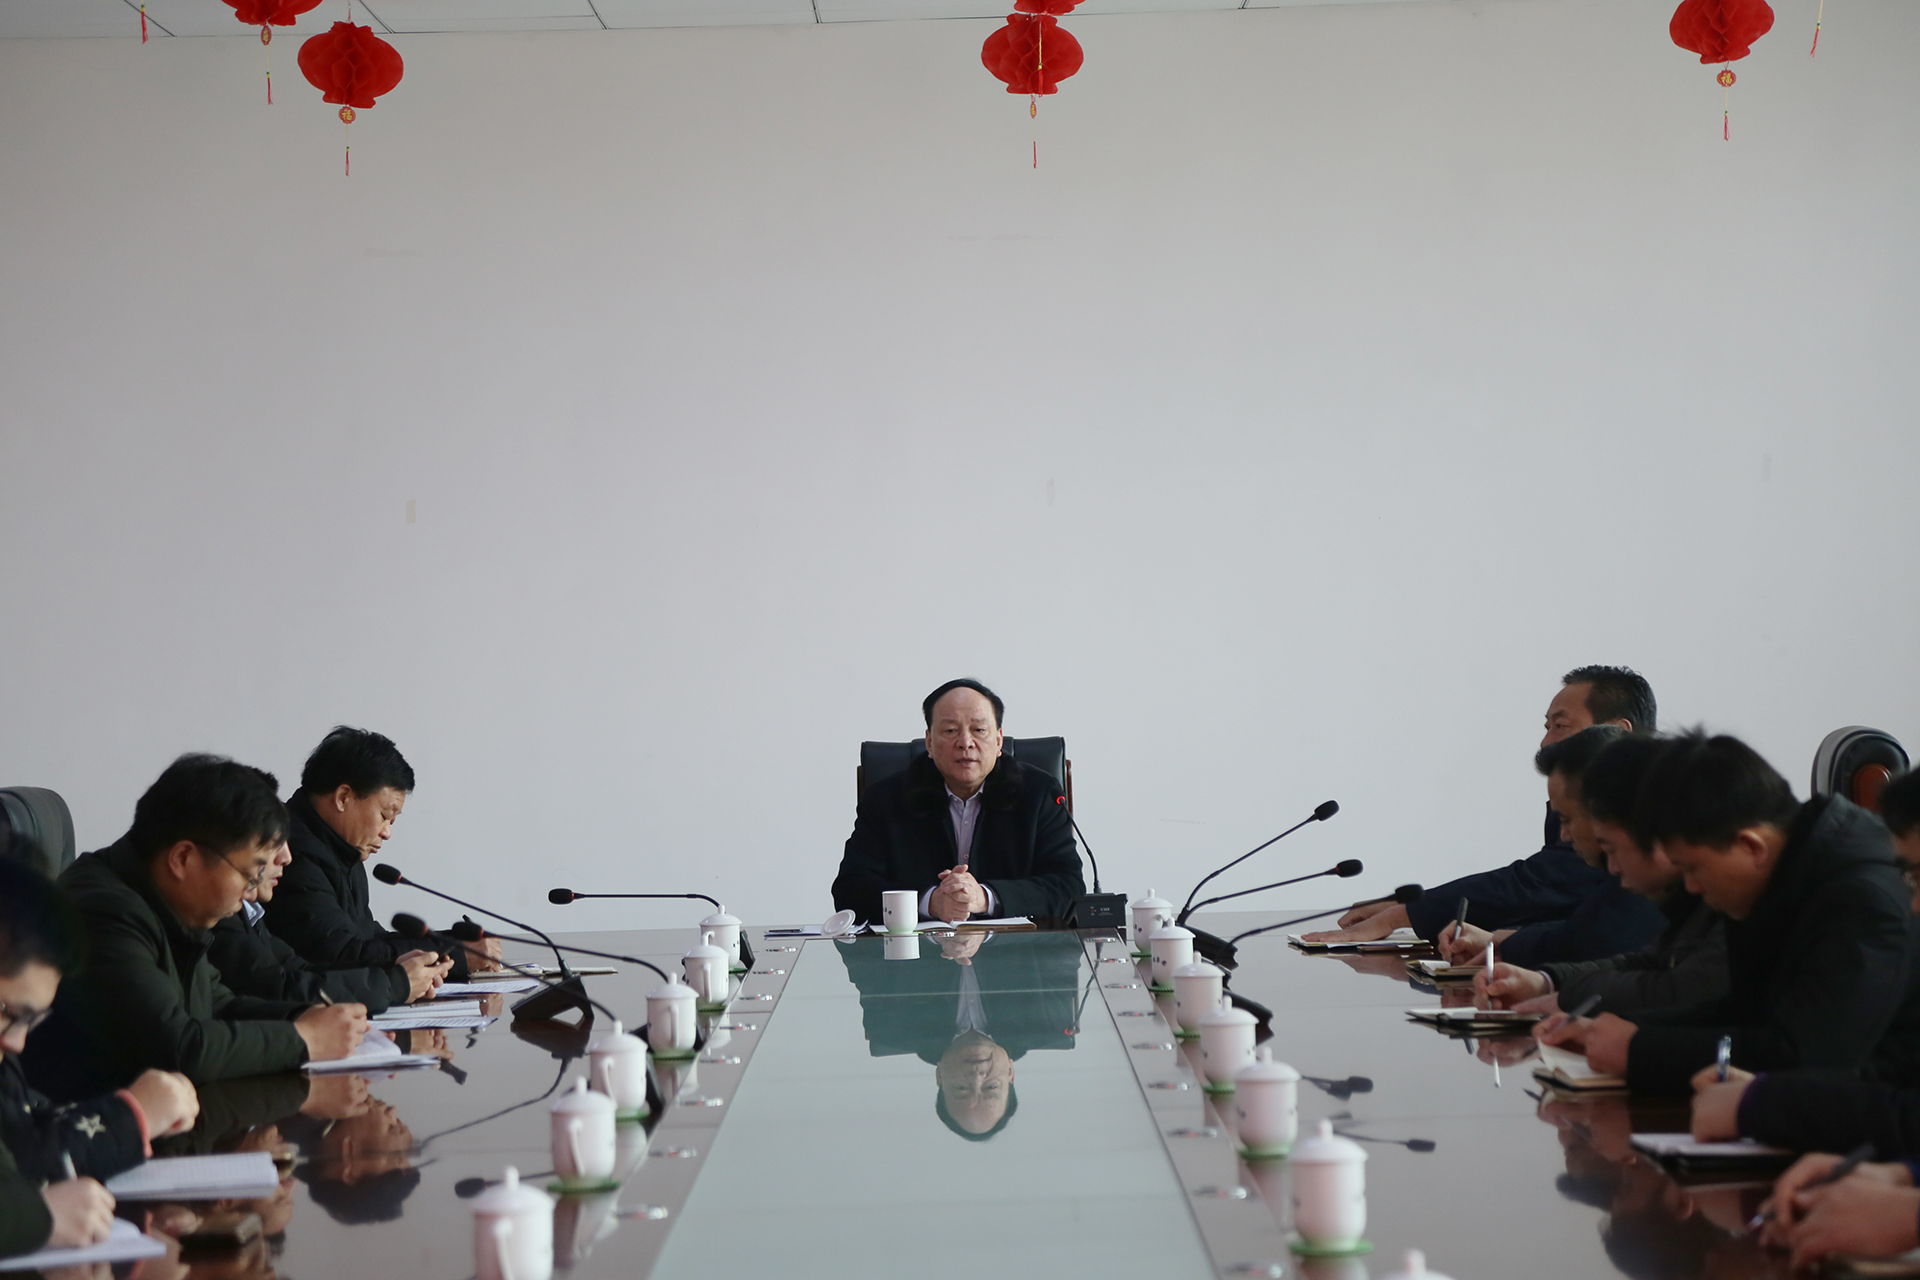 China Coal Group Holds 2019 Work Summary Meeting